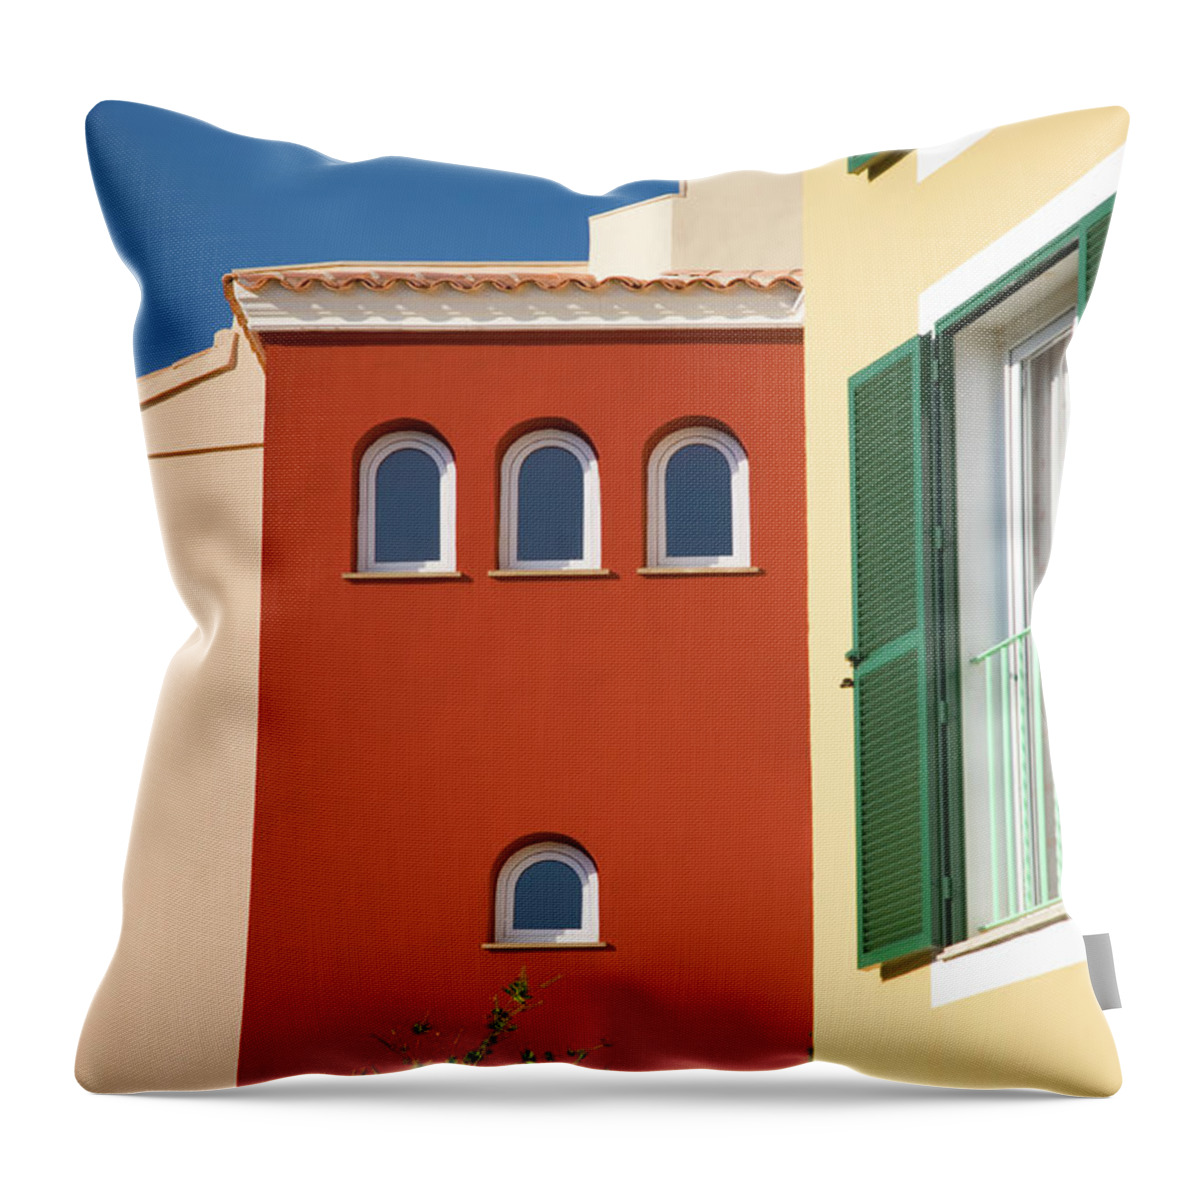 Apartment Throw Pillow featuring the photograph Colourful Facades Of Luxury Apartment by David C Tomlinson